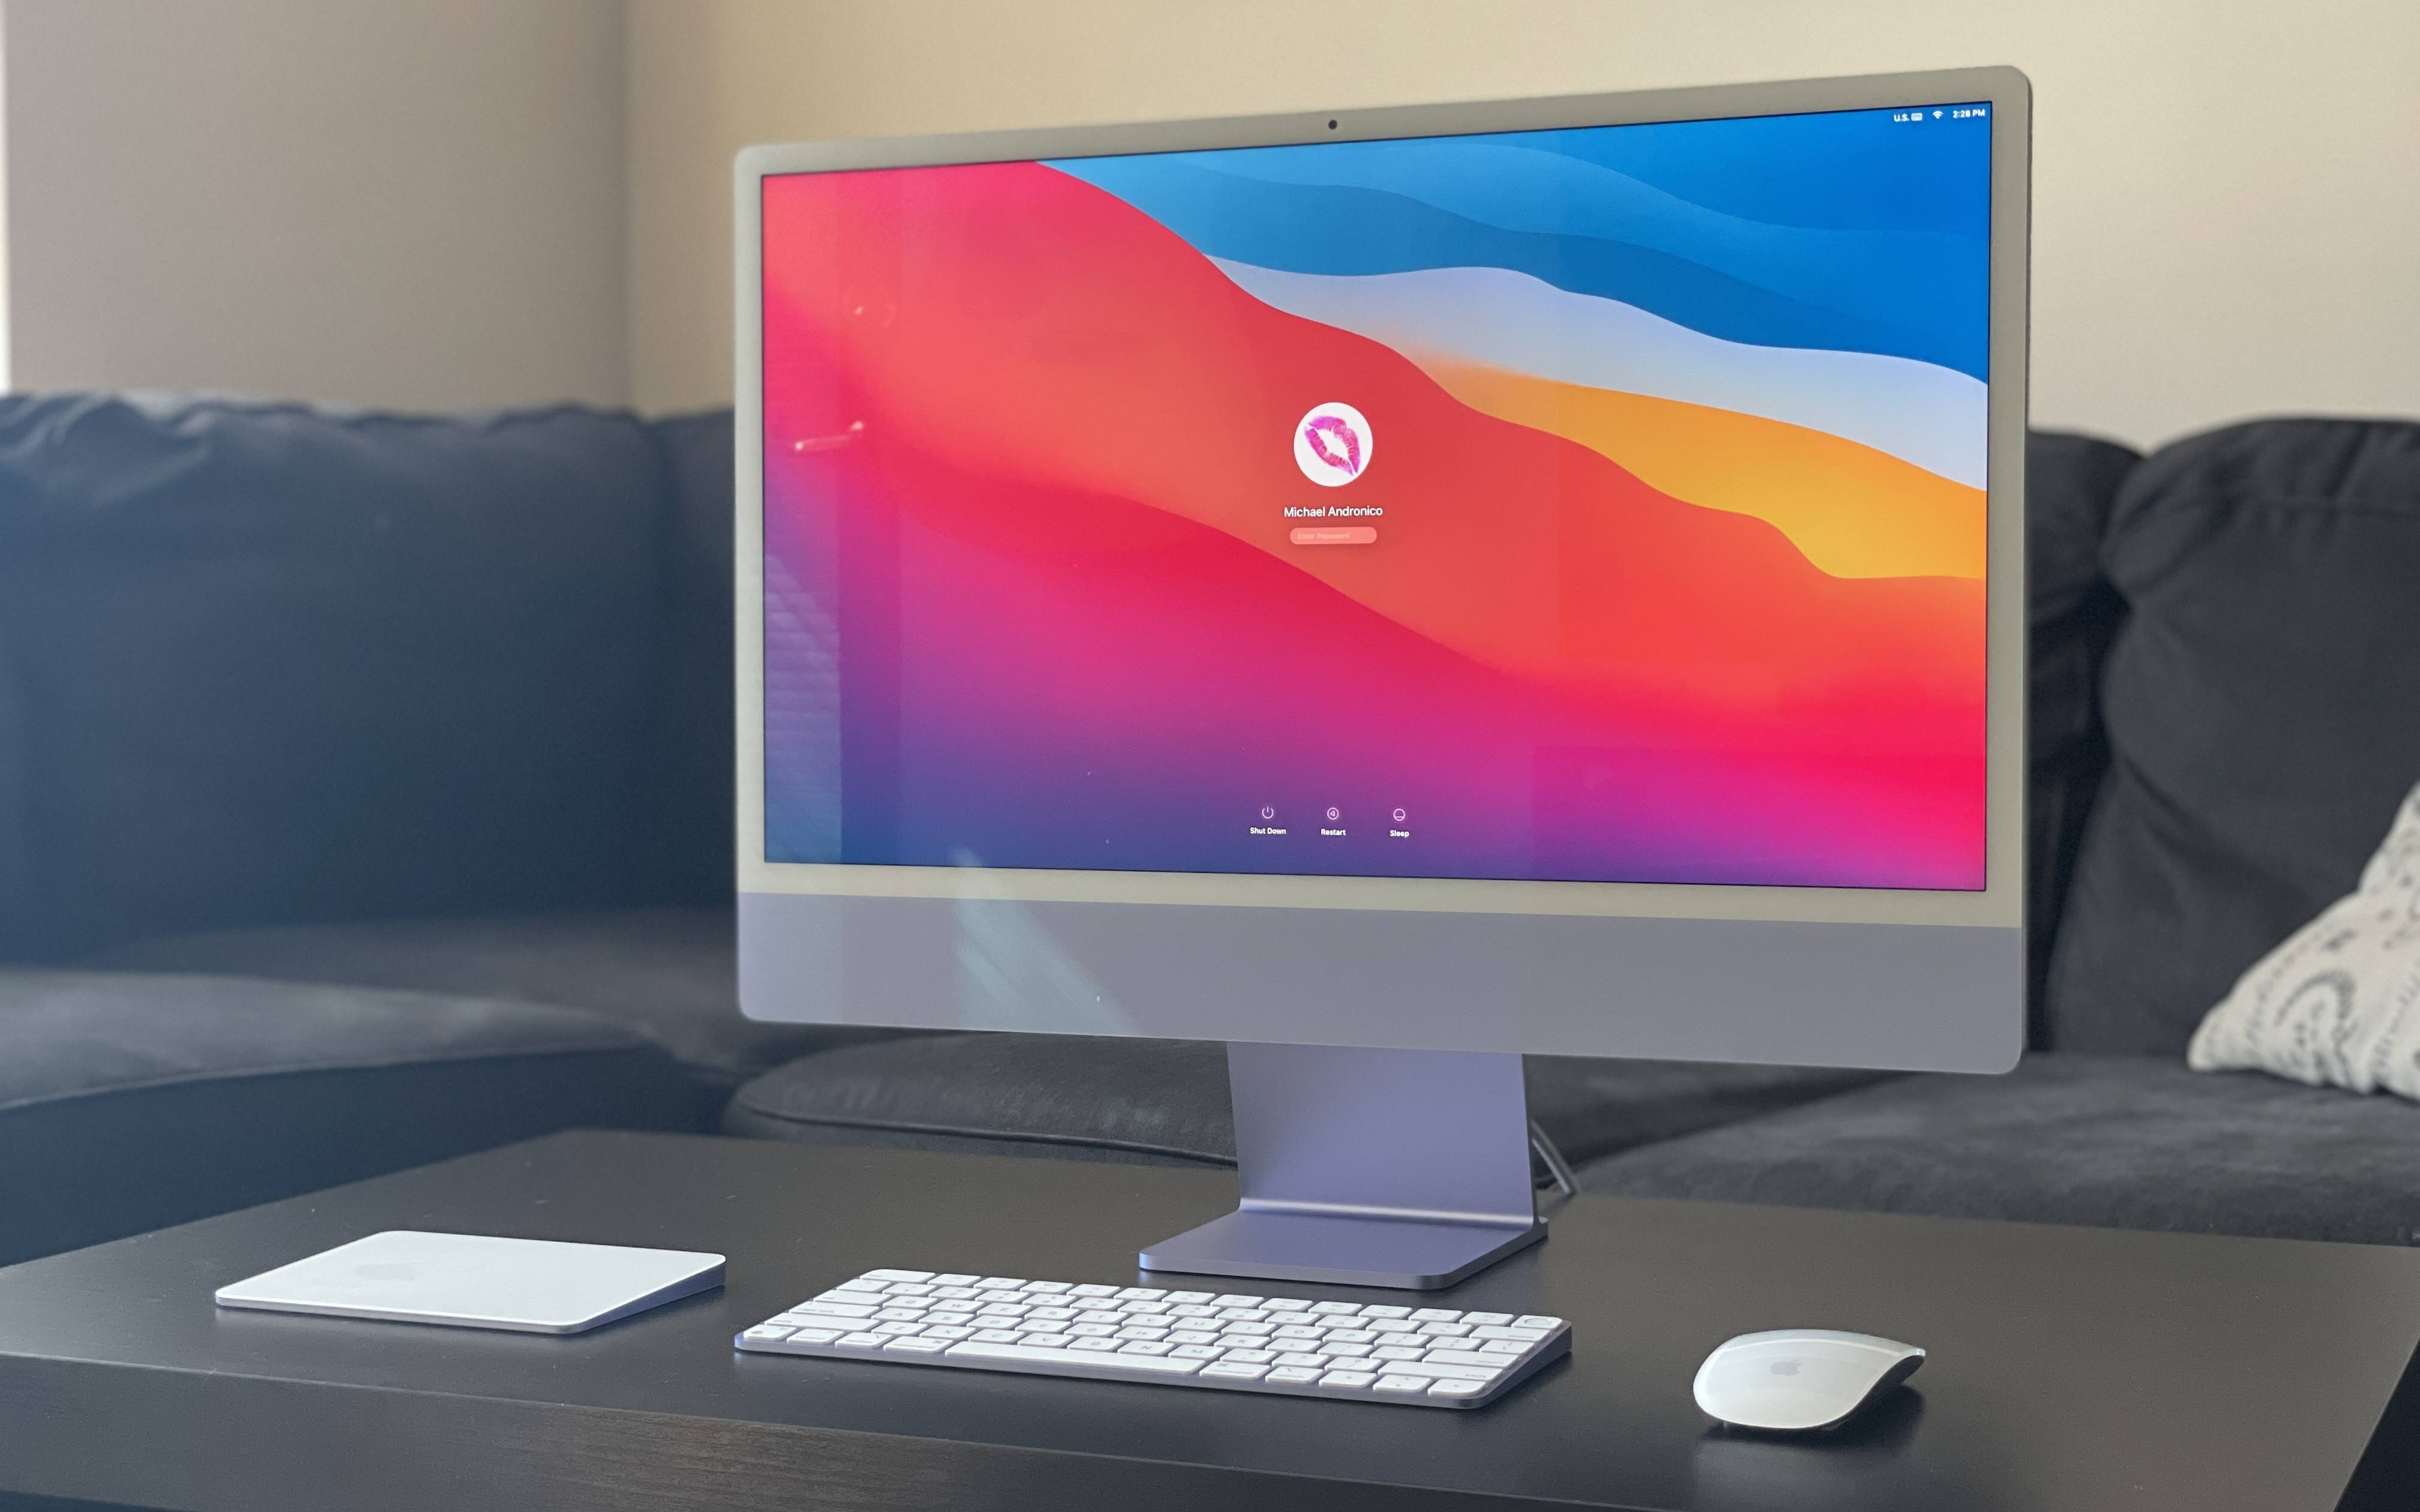 New 24-inch iMac in production testing, but won't ship until late 2023